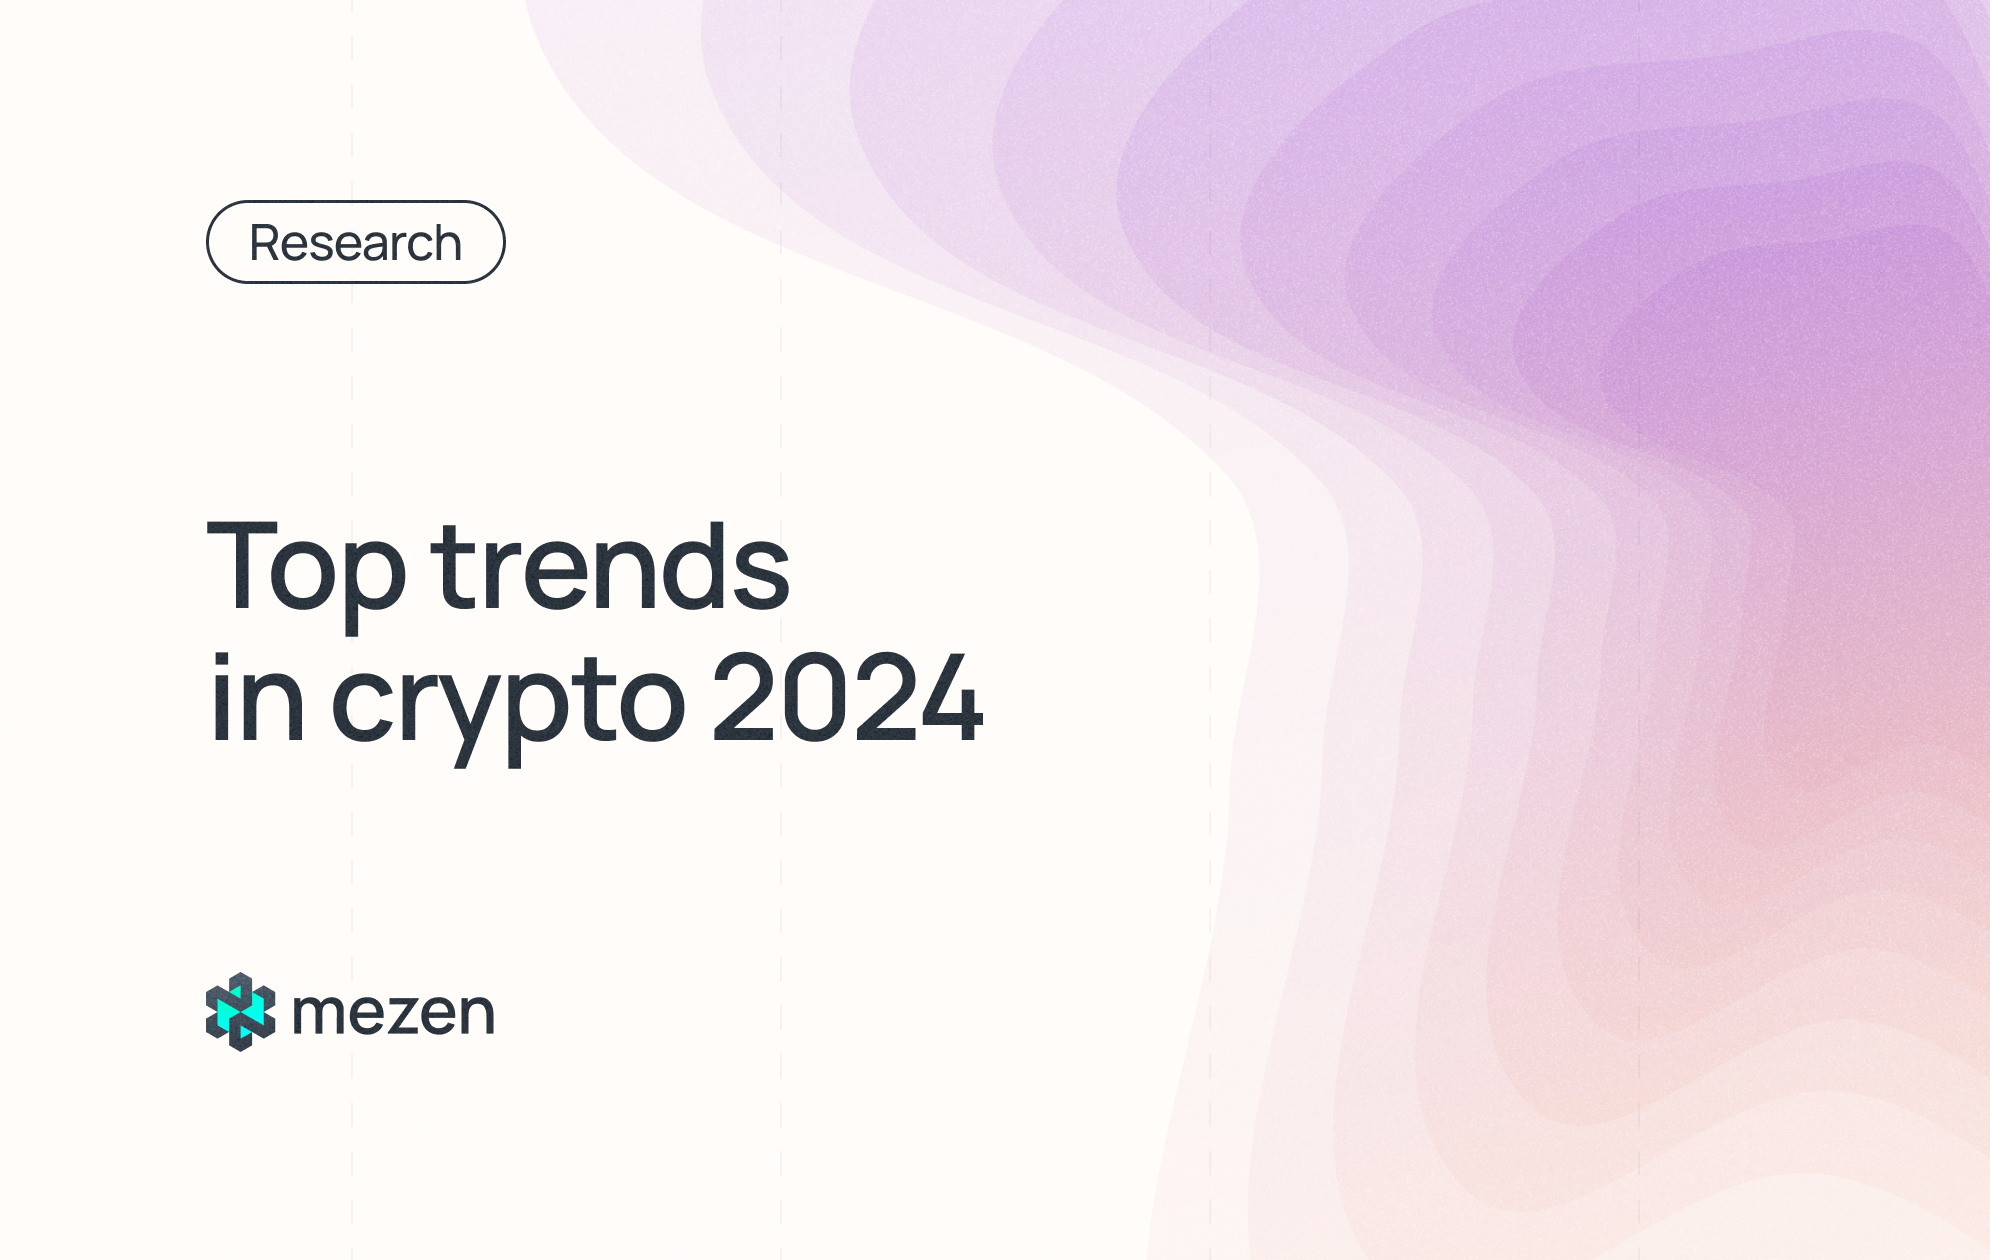 Top trends in crypto 2024